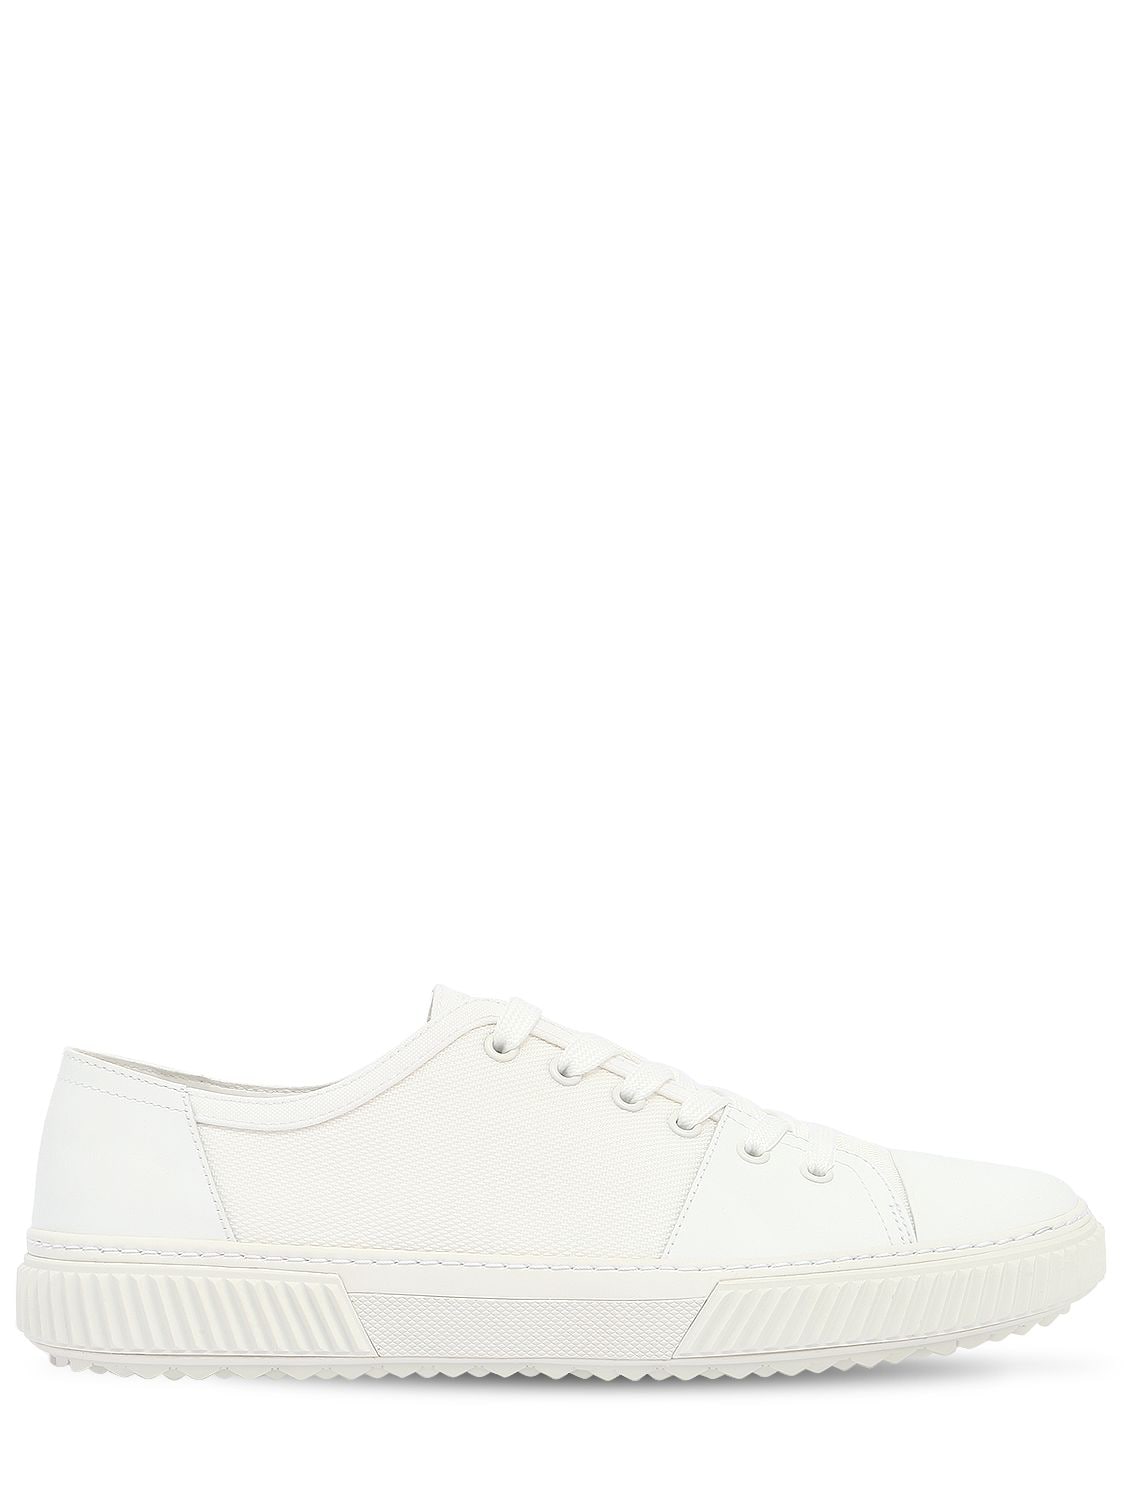 Stratus Mesh & Leather Sneakers